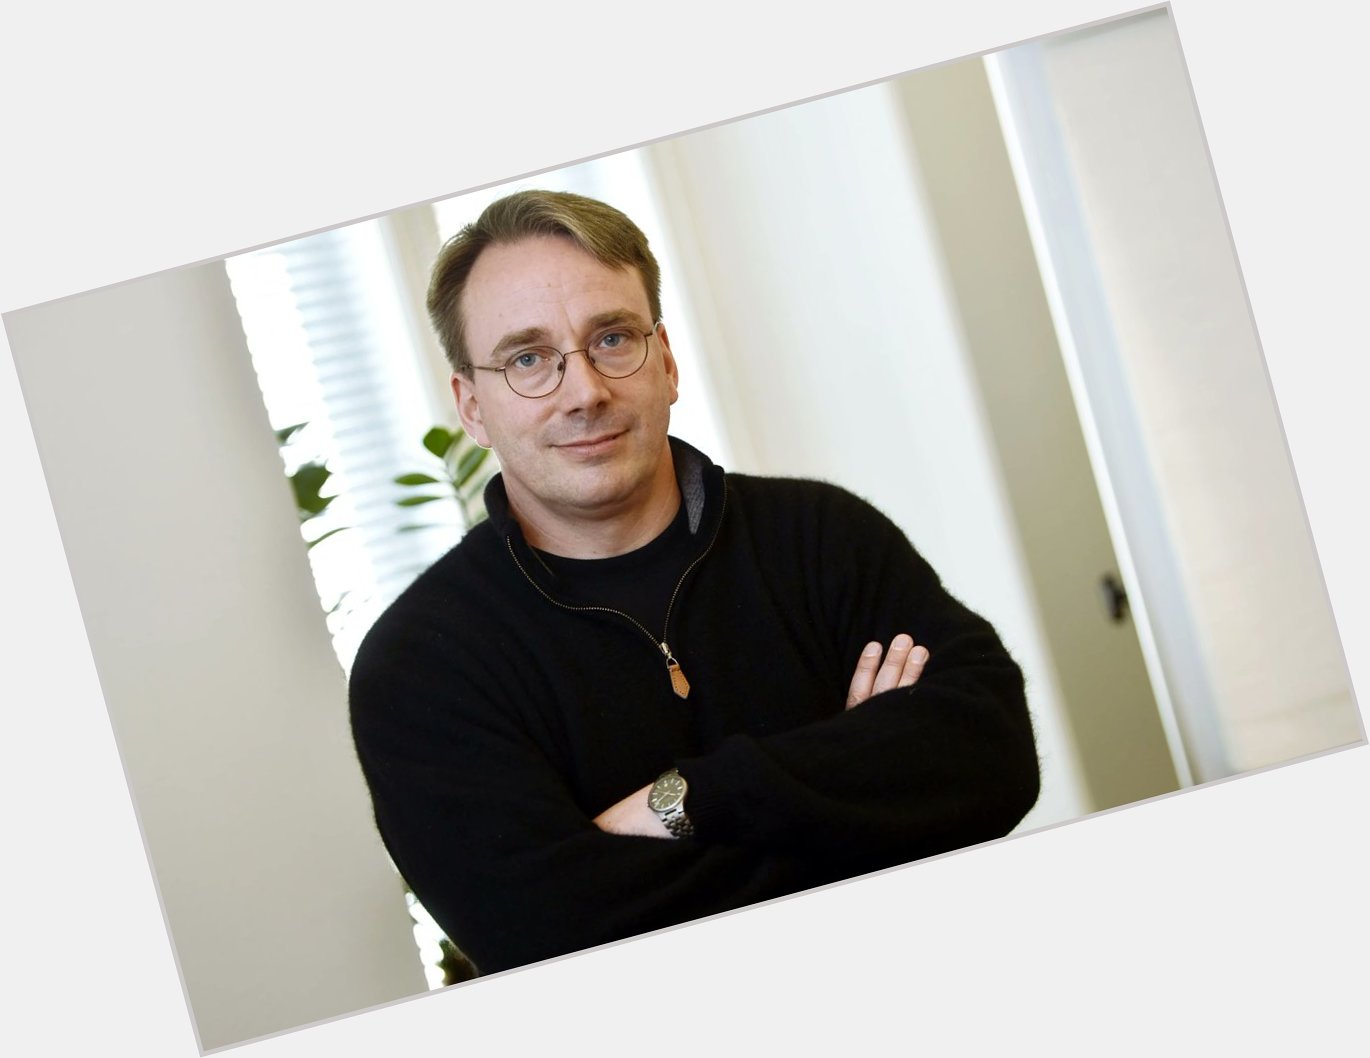 Happy Birthday to the creator of Linux, Linus Torvalds! 